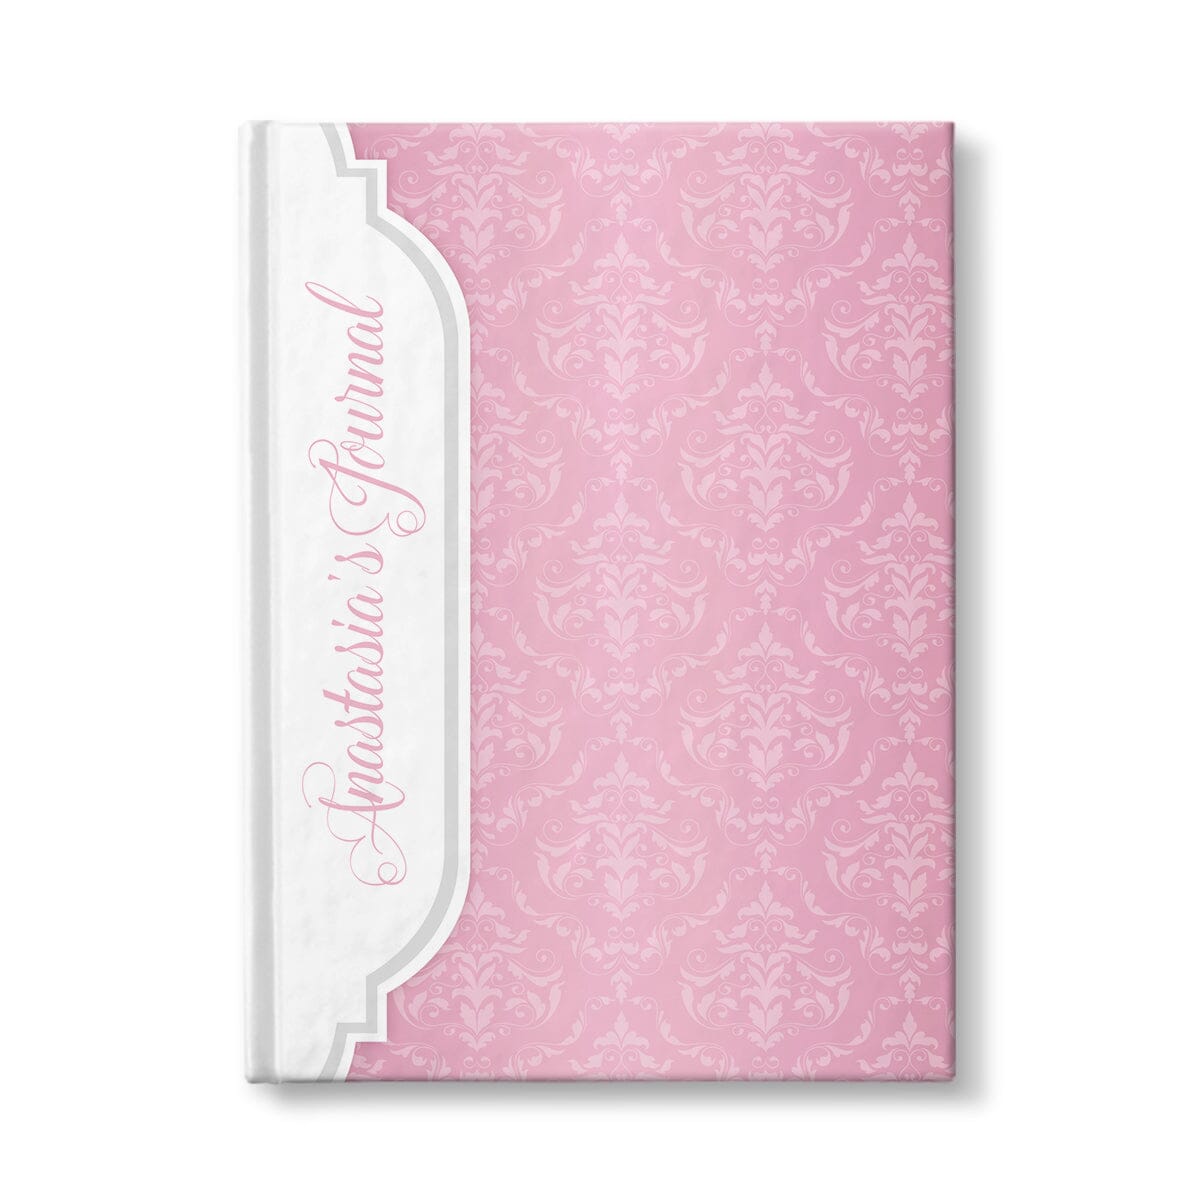 Personalized Pink Damask Journal at Artistically Invited.